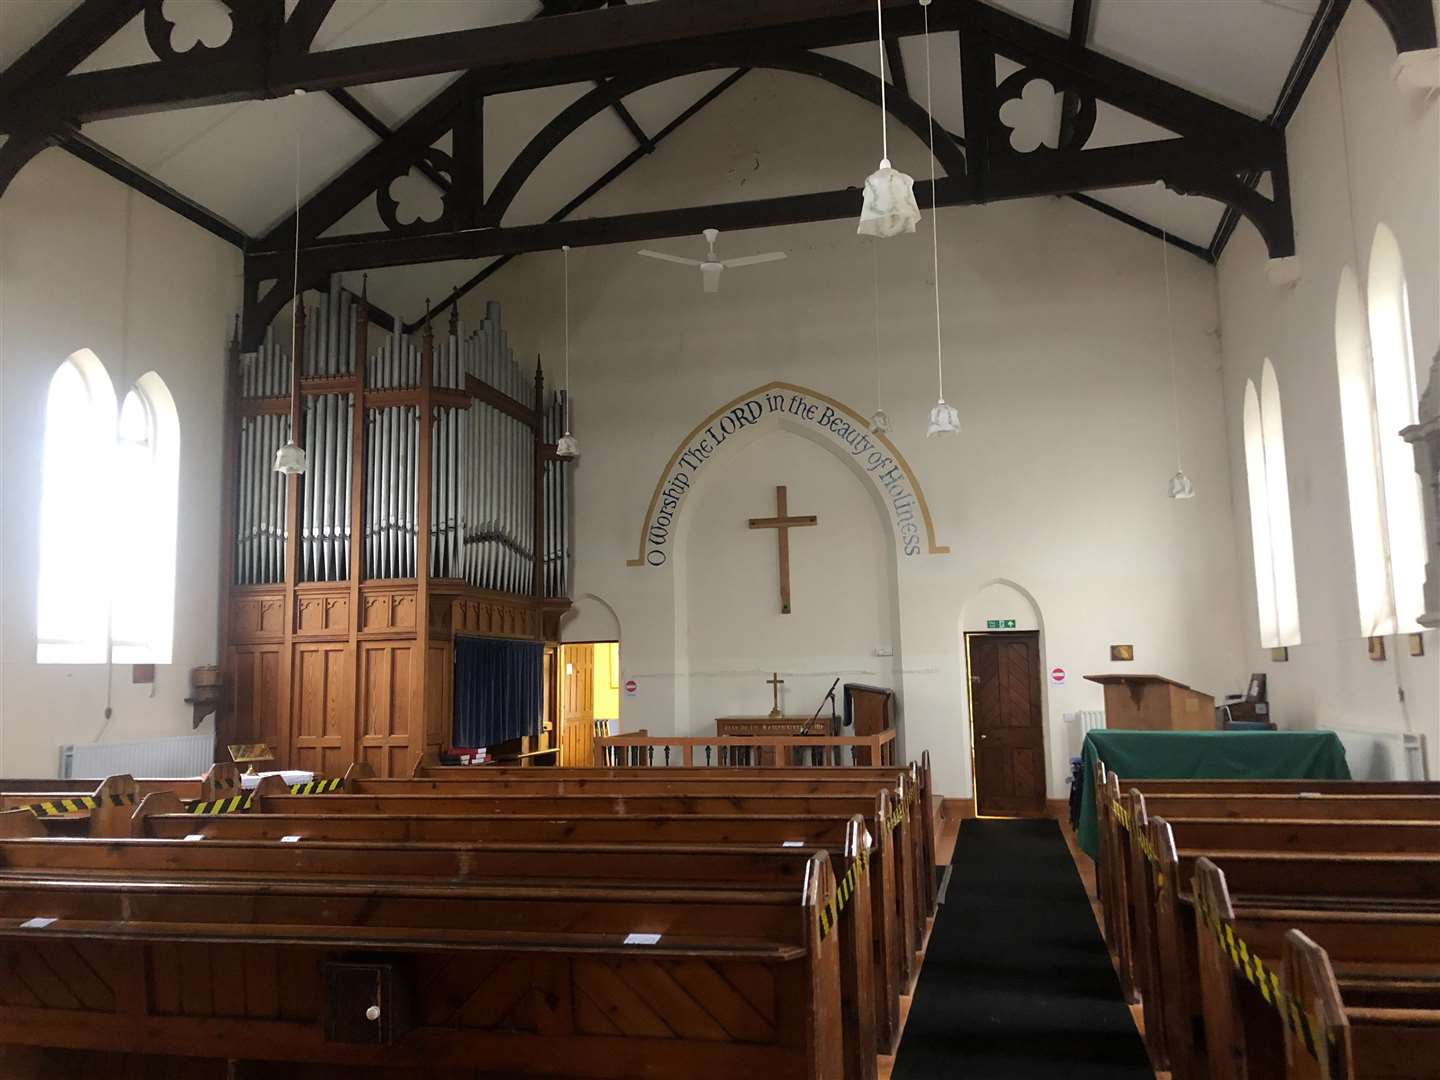 The interior of Headcorn Methodist Church - before the organ was removed